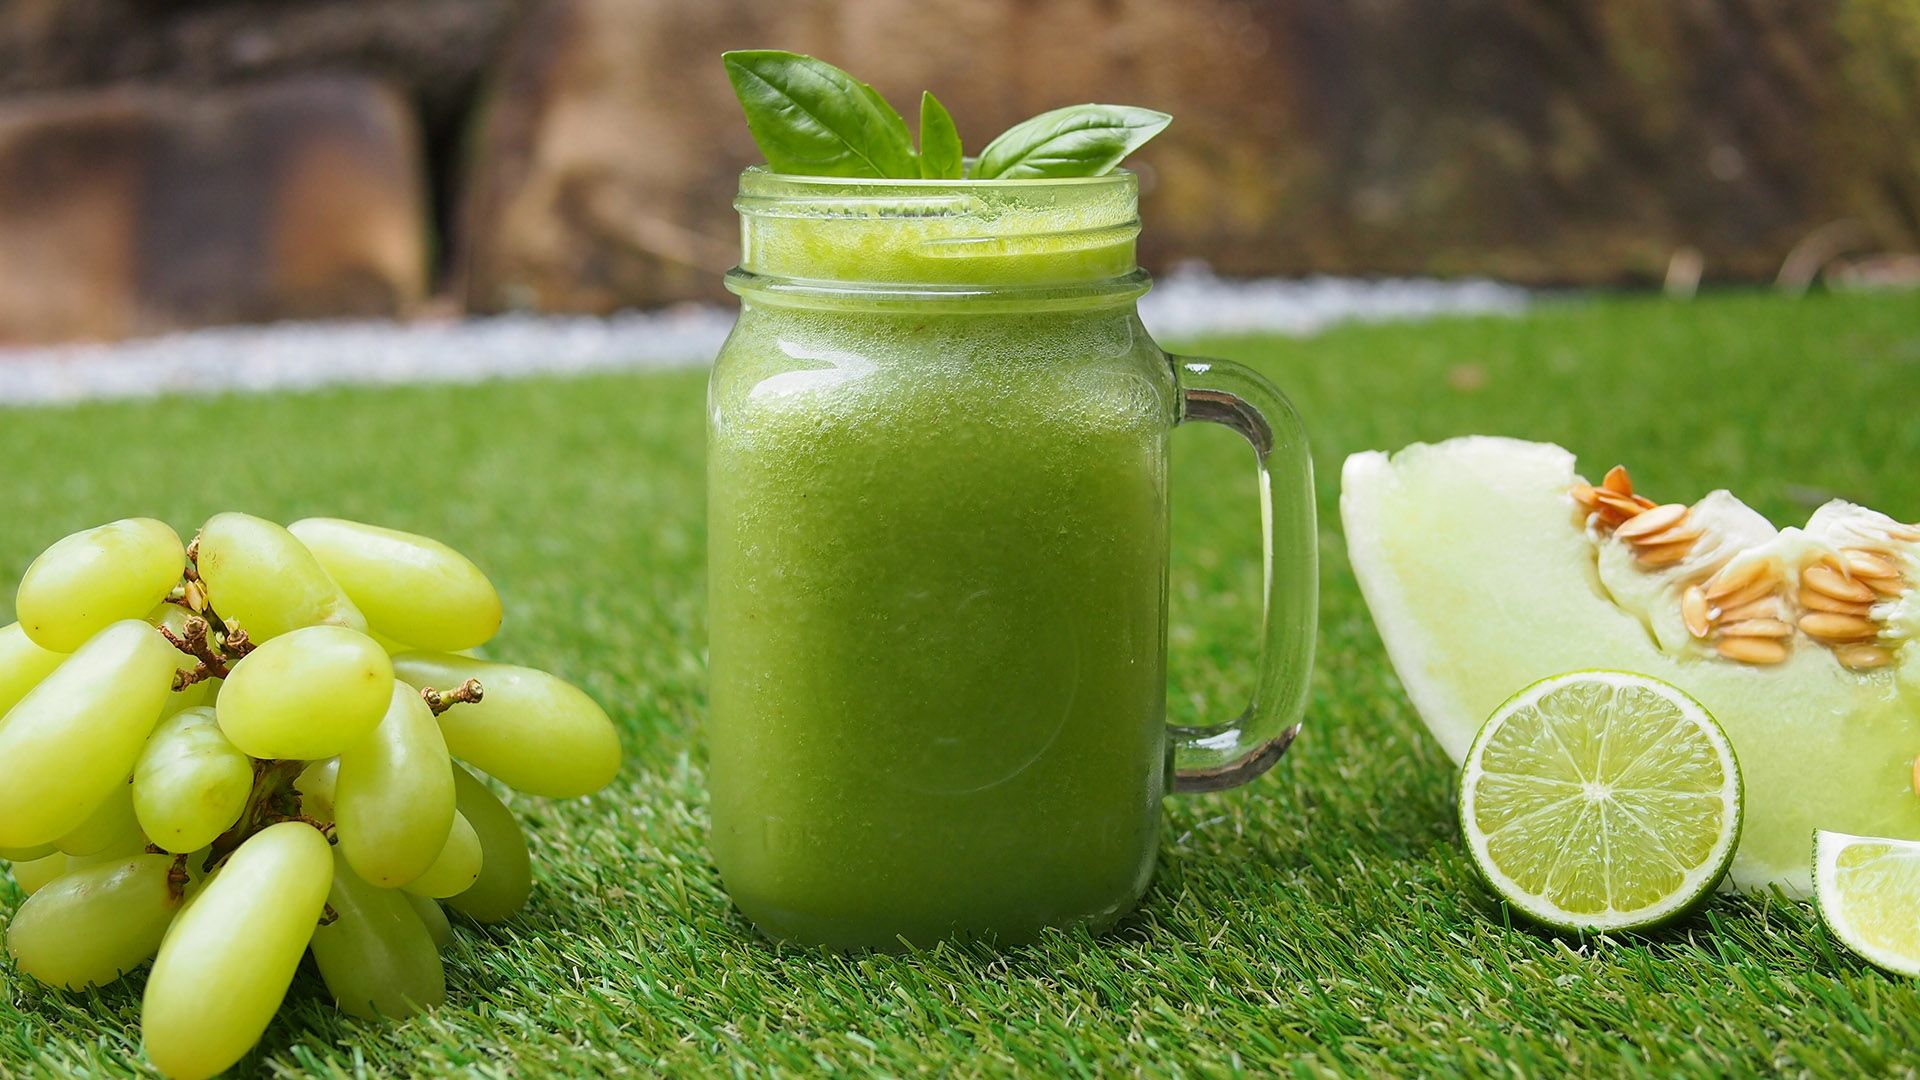 Image of Frosty Basil Limeade with grapes and melon